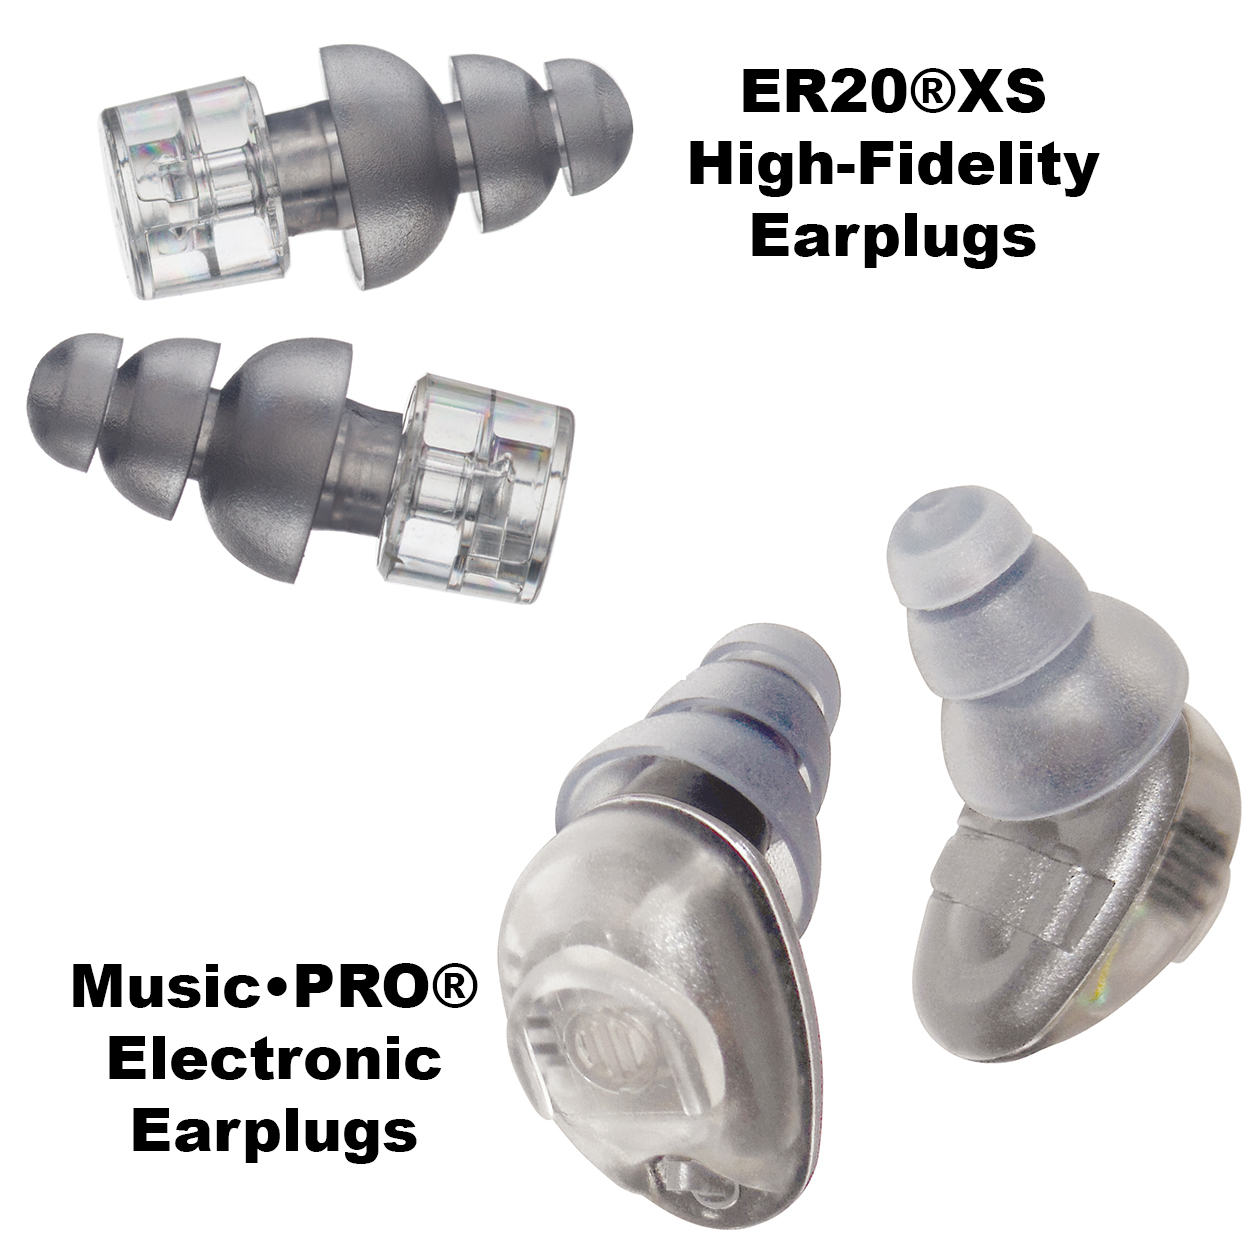 Etymotic Brings The Latest In Hearing Health To PASIC